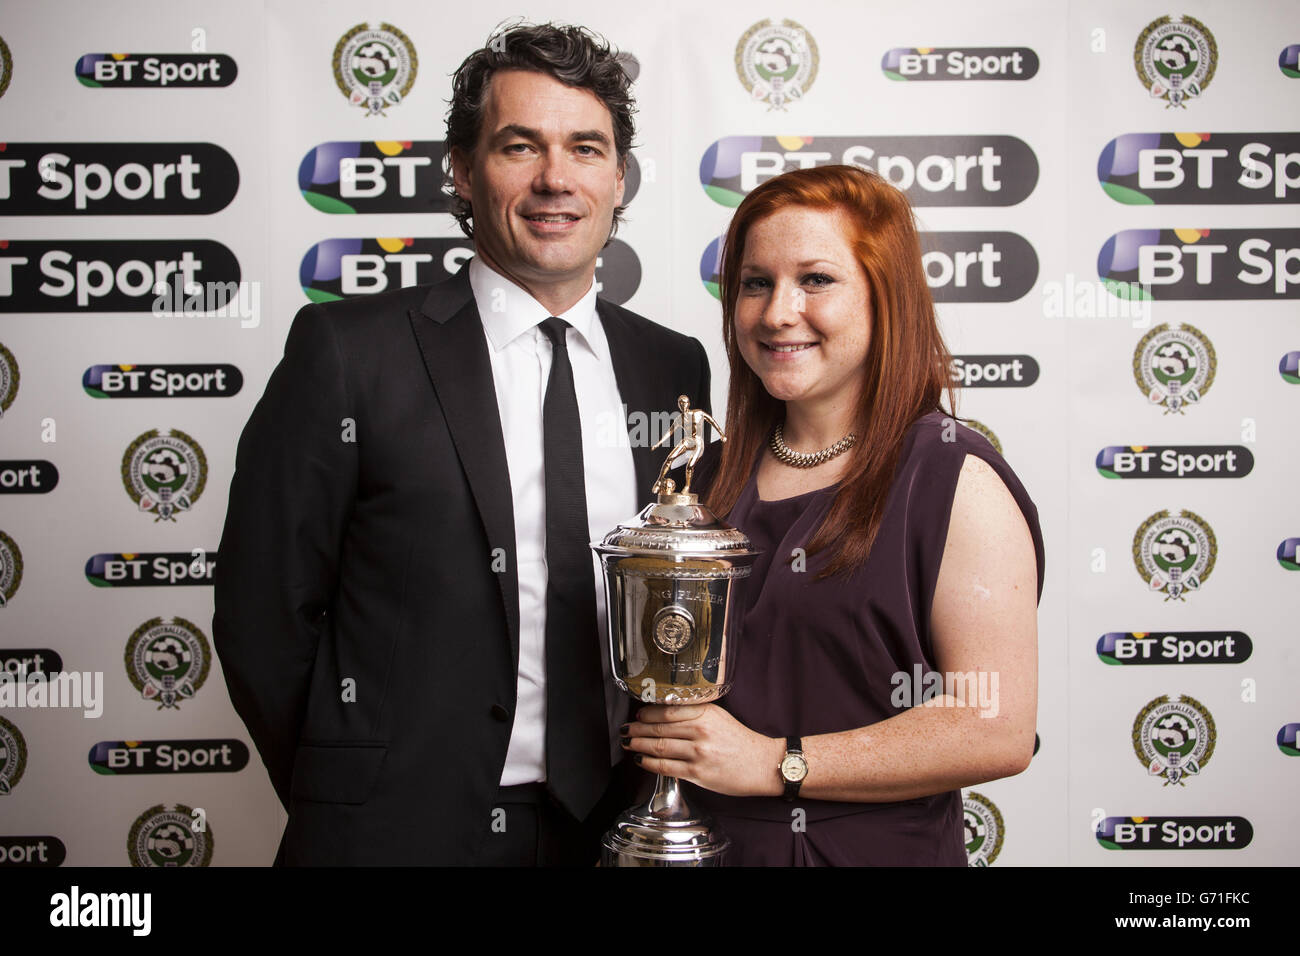 Liverpool Ladies Martha Harris receives the PFA Young Player Of The Year Award, alongside BT Group Chief Executive Gavin Patterson, during the PFA Player of the Year Awards at the Grosvenor Hotel, London. Stock Photo